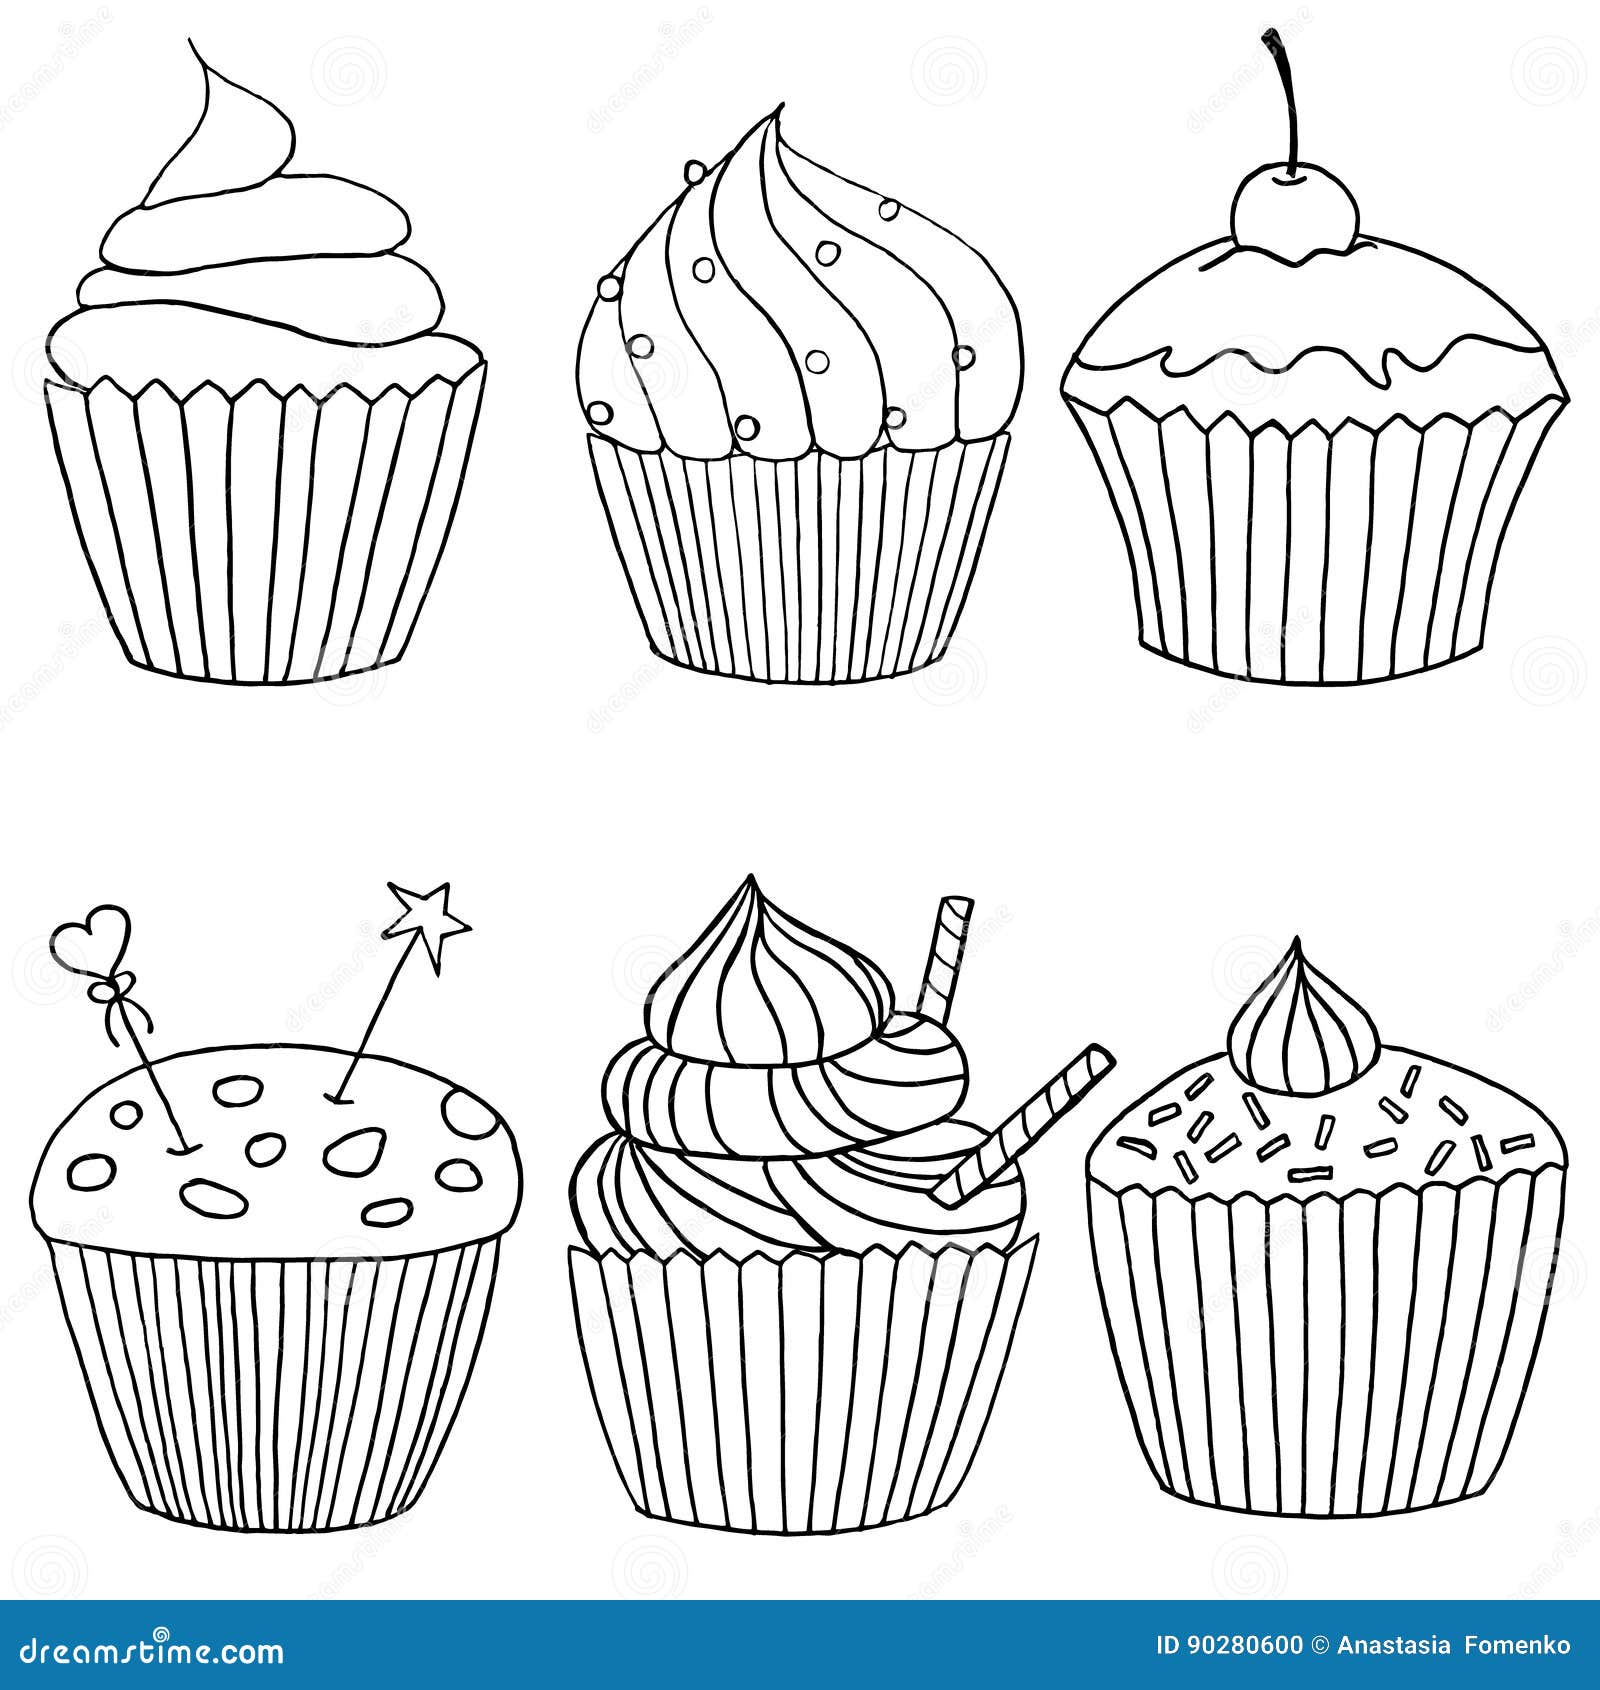 six images of cupcakes in black and white drawnhand